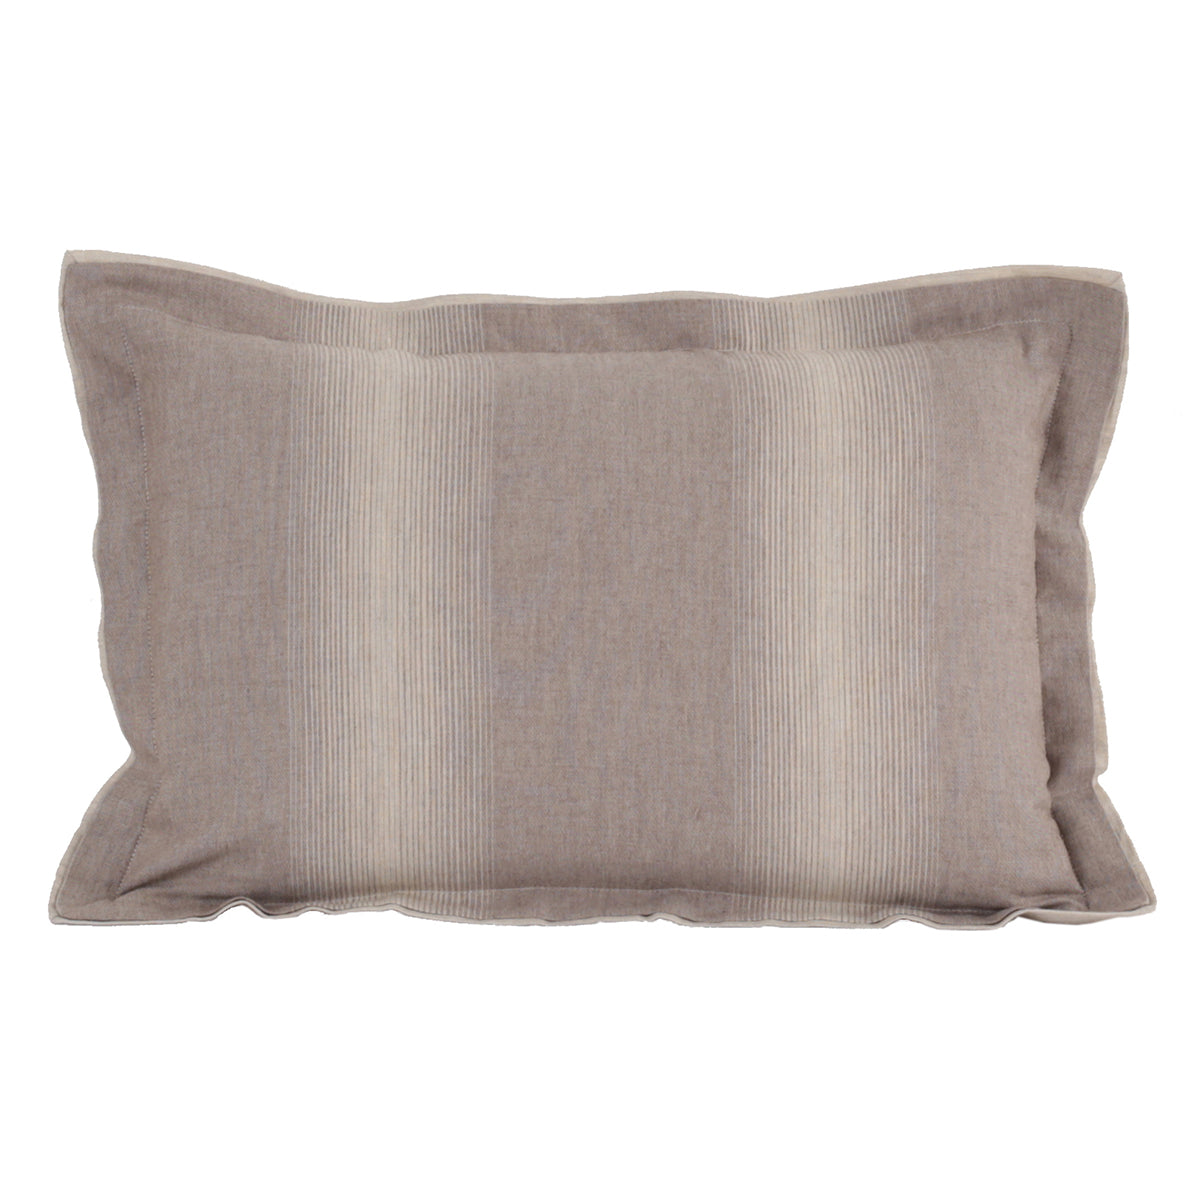 Rhythmic Stripe Made With Egyptian Cotton Cushion Cover